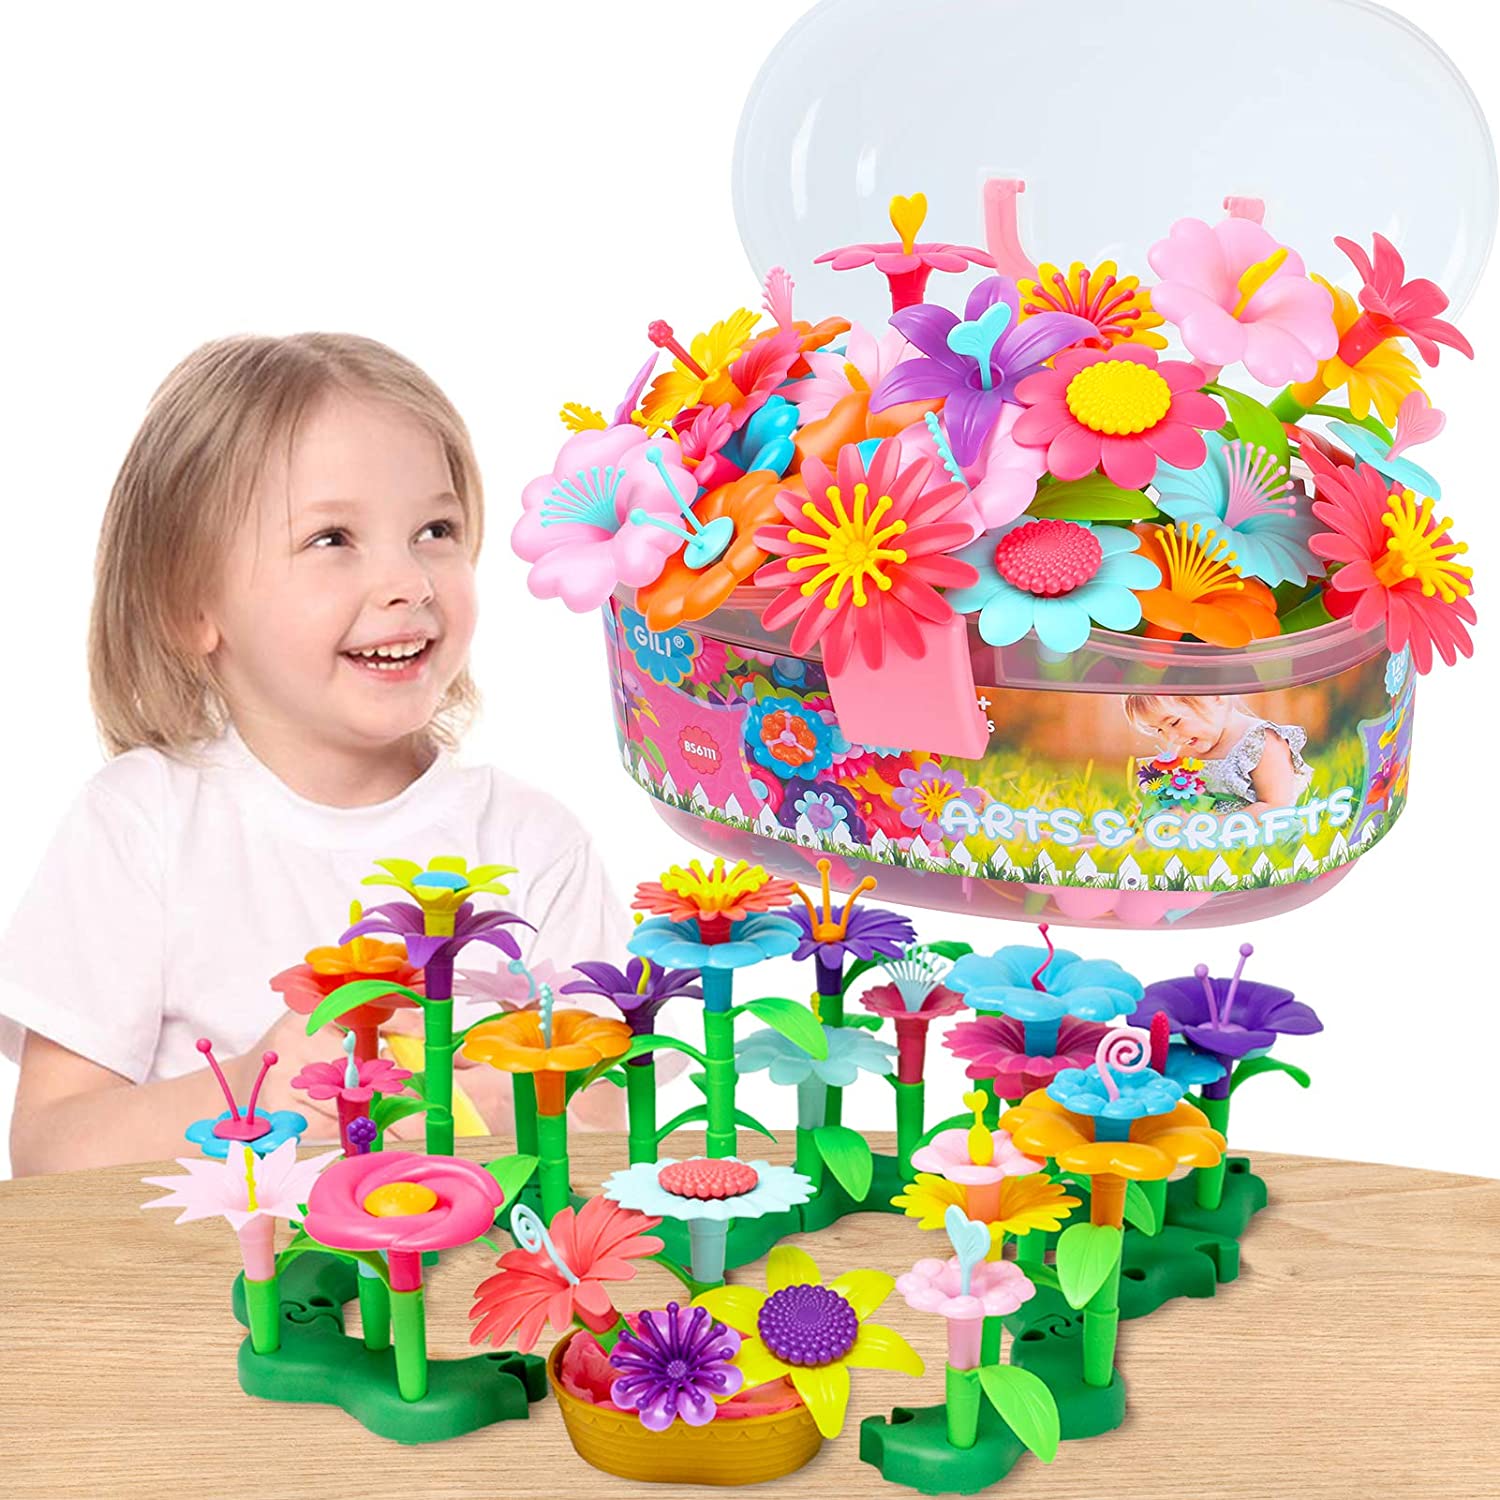 Garden Arts Gifts for 3 4 5 6 7 Year Old Boys Girls Powerextra 148Pcs Flower Garden Building Set Toy for Kids Education Build Bouquet 